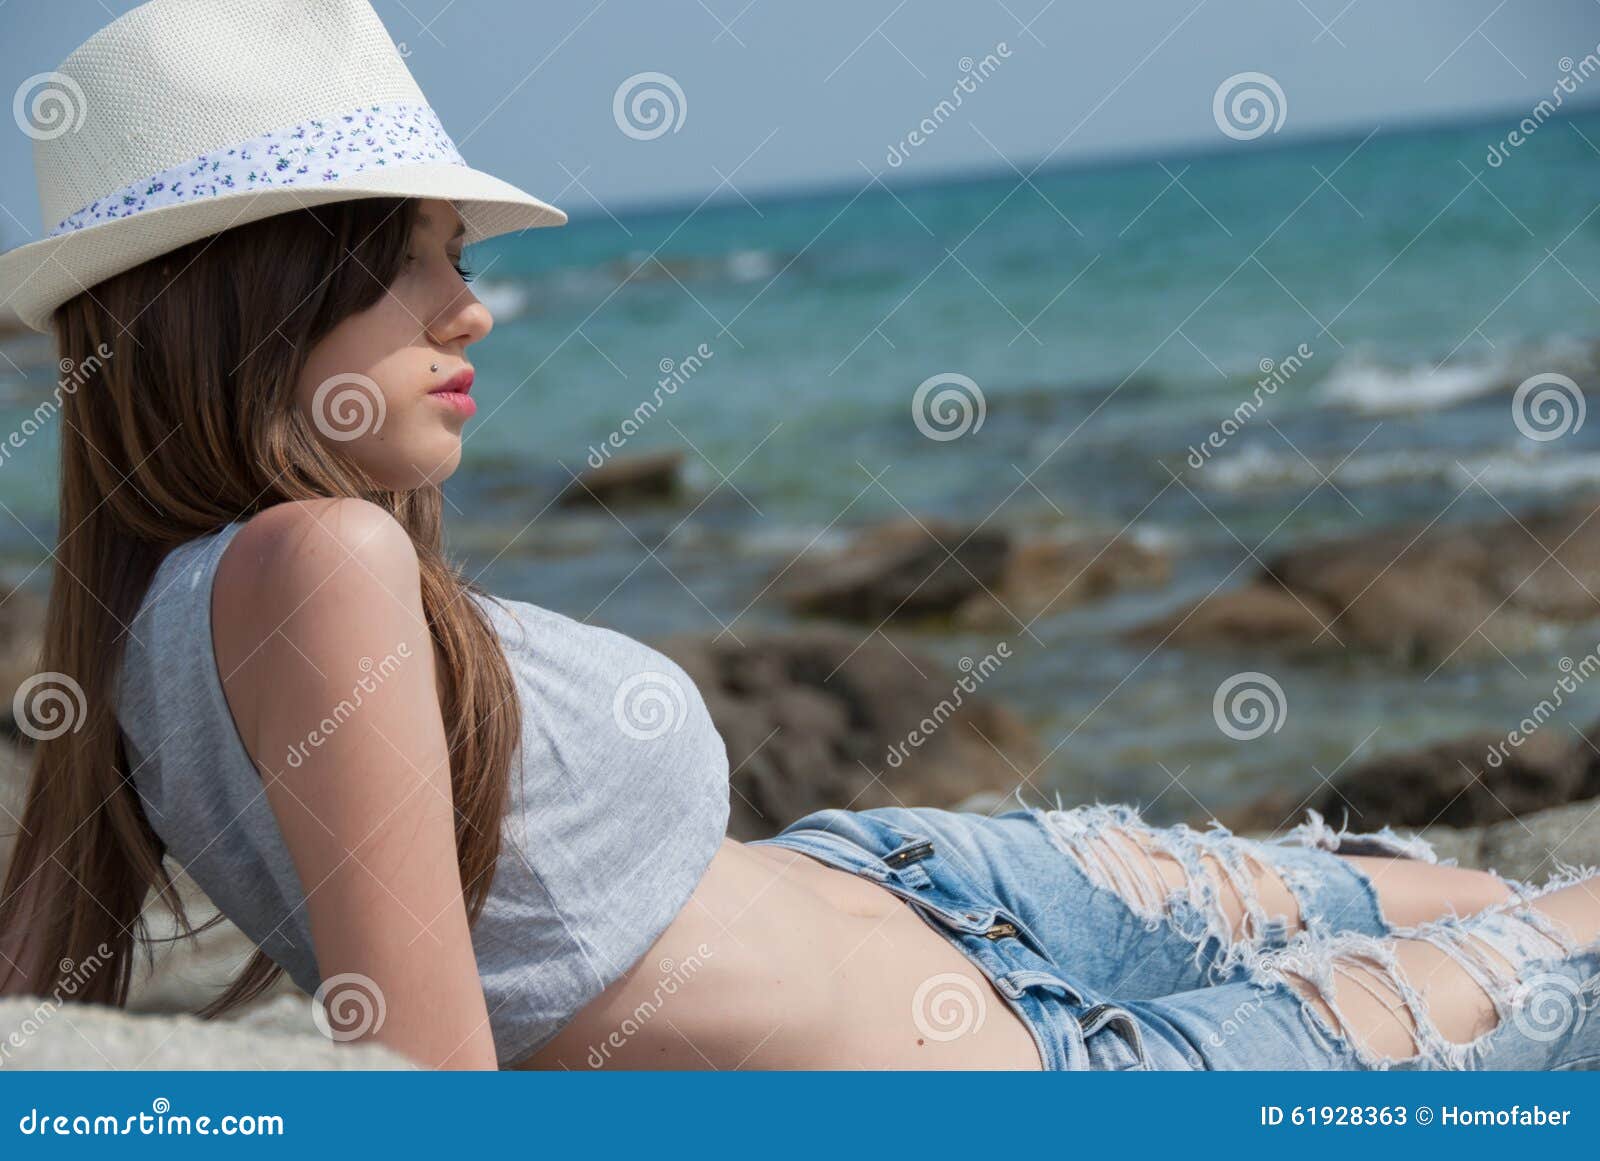 Young Girl Wearing Shorts And Crop Top And Hat Posing Outside Stock Image Image Of Clothing Europe